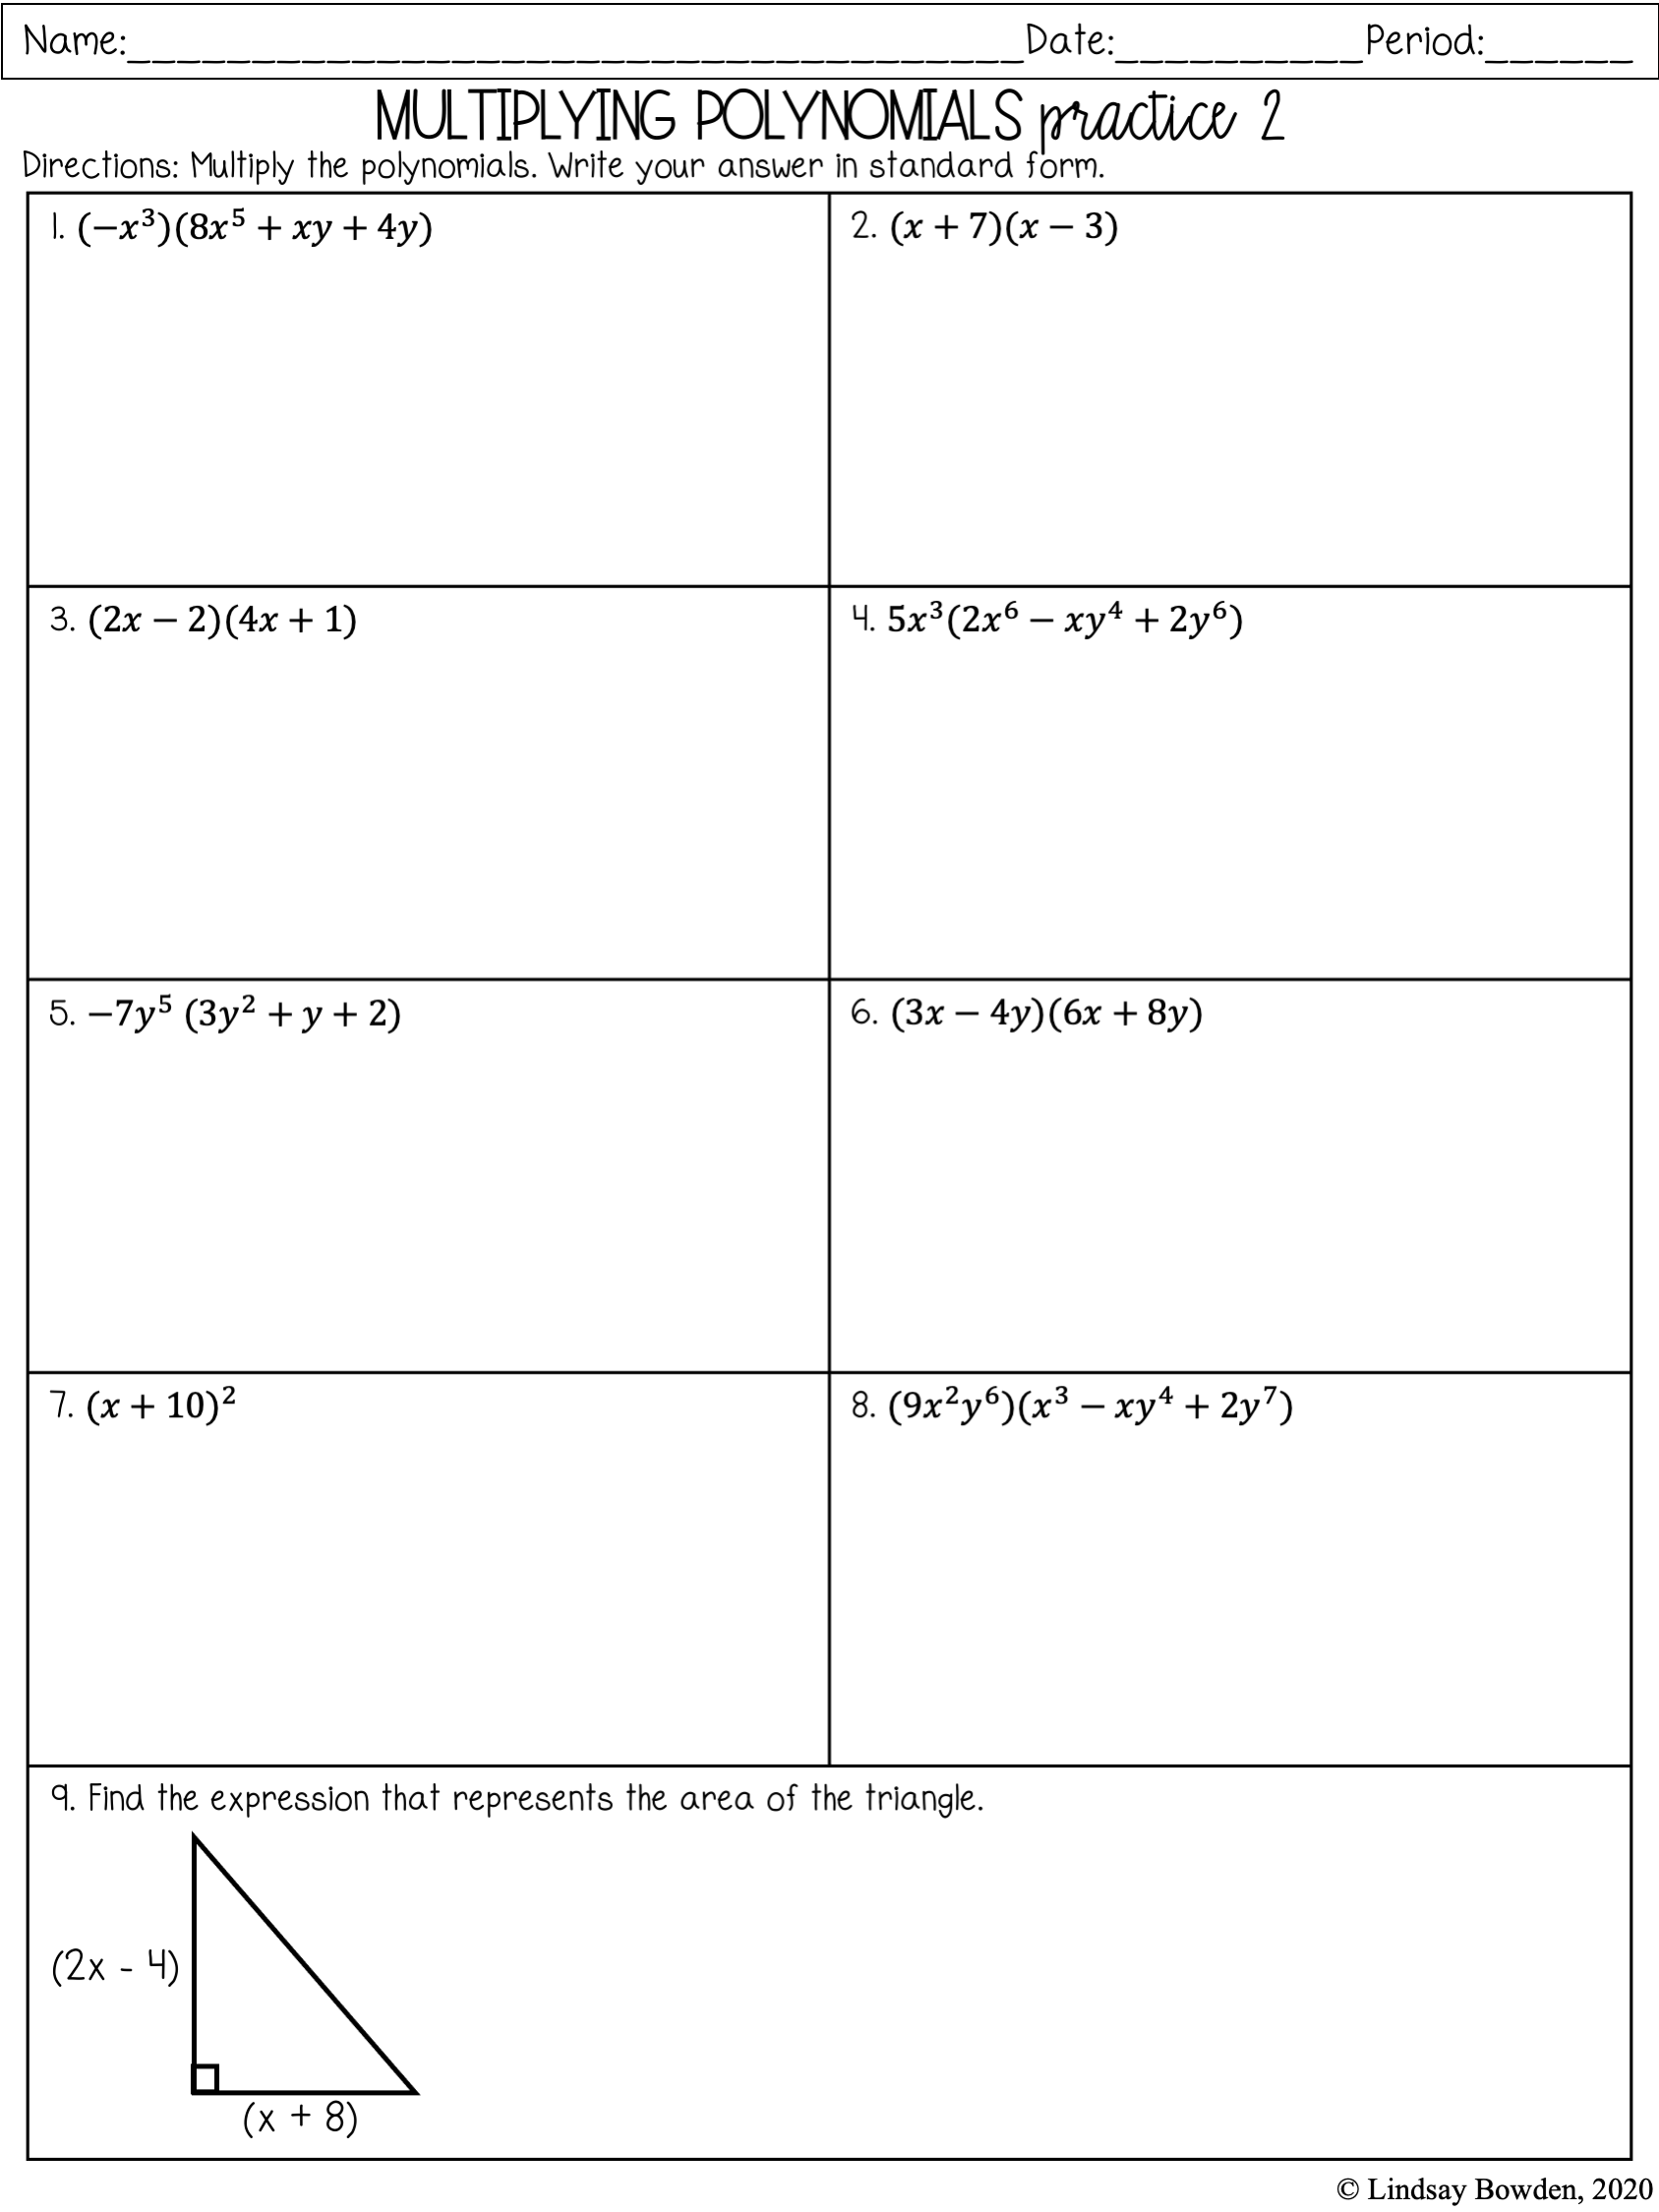 Multiplying Polynomials Notes and Worksheets - Lindsay Bowden Regarding Multiplying Polynomials Worksheet 1 Answers